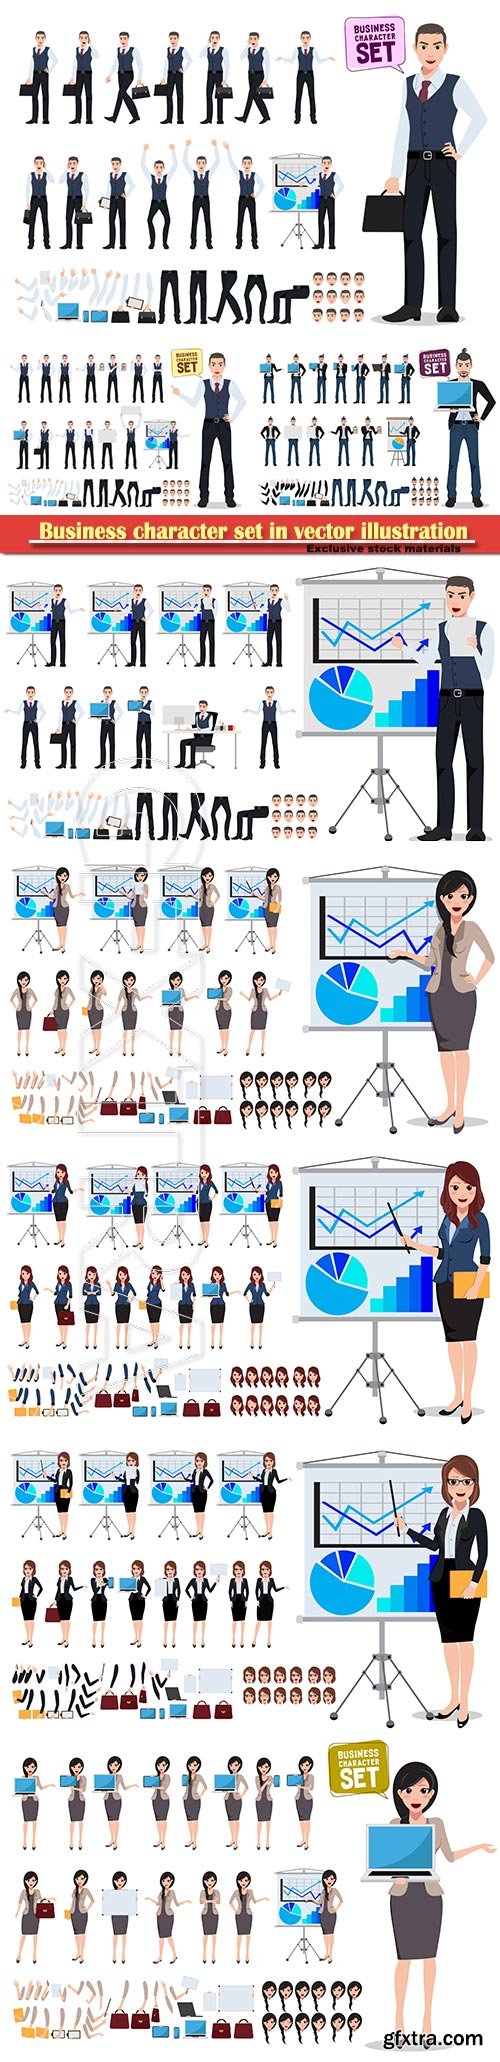 Business character set in vector illustration